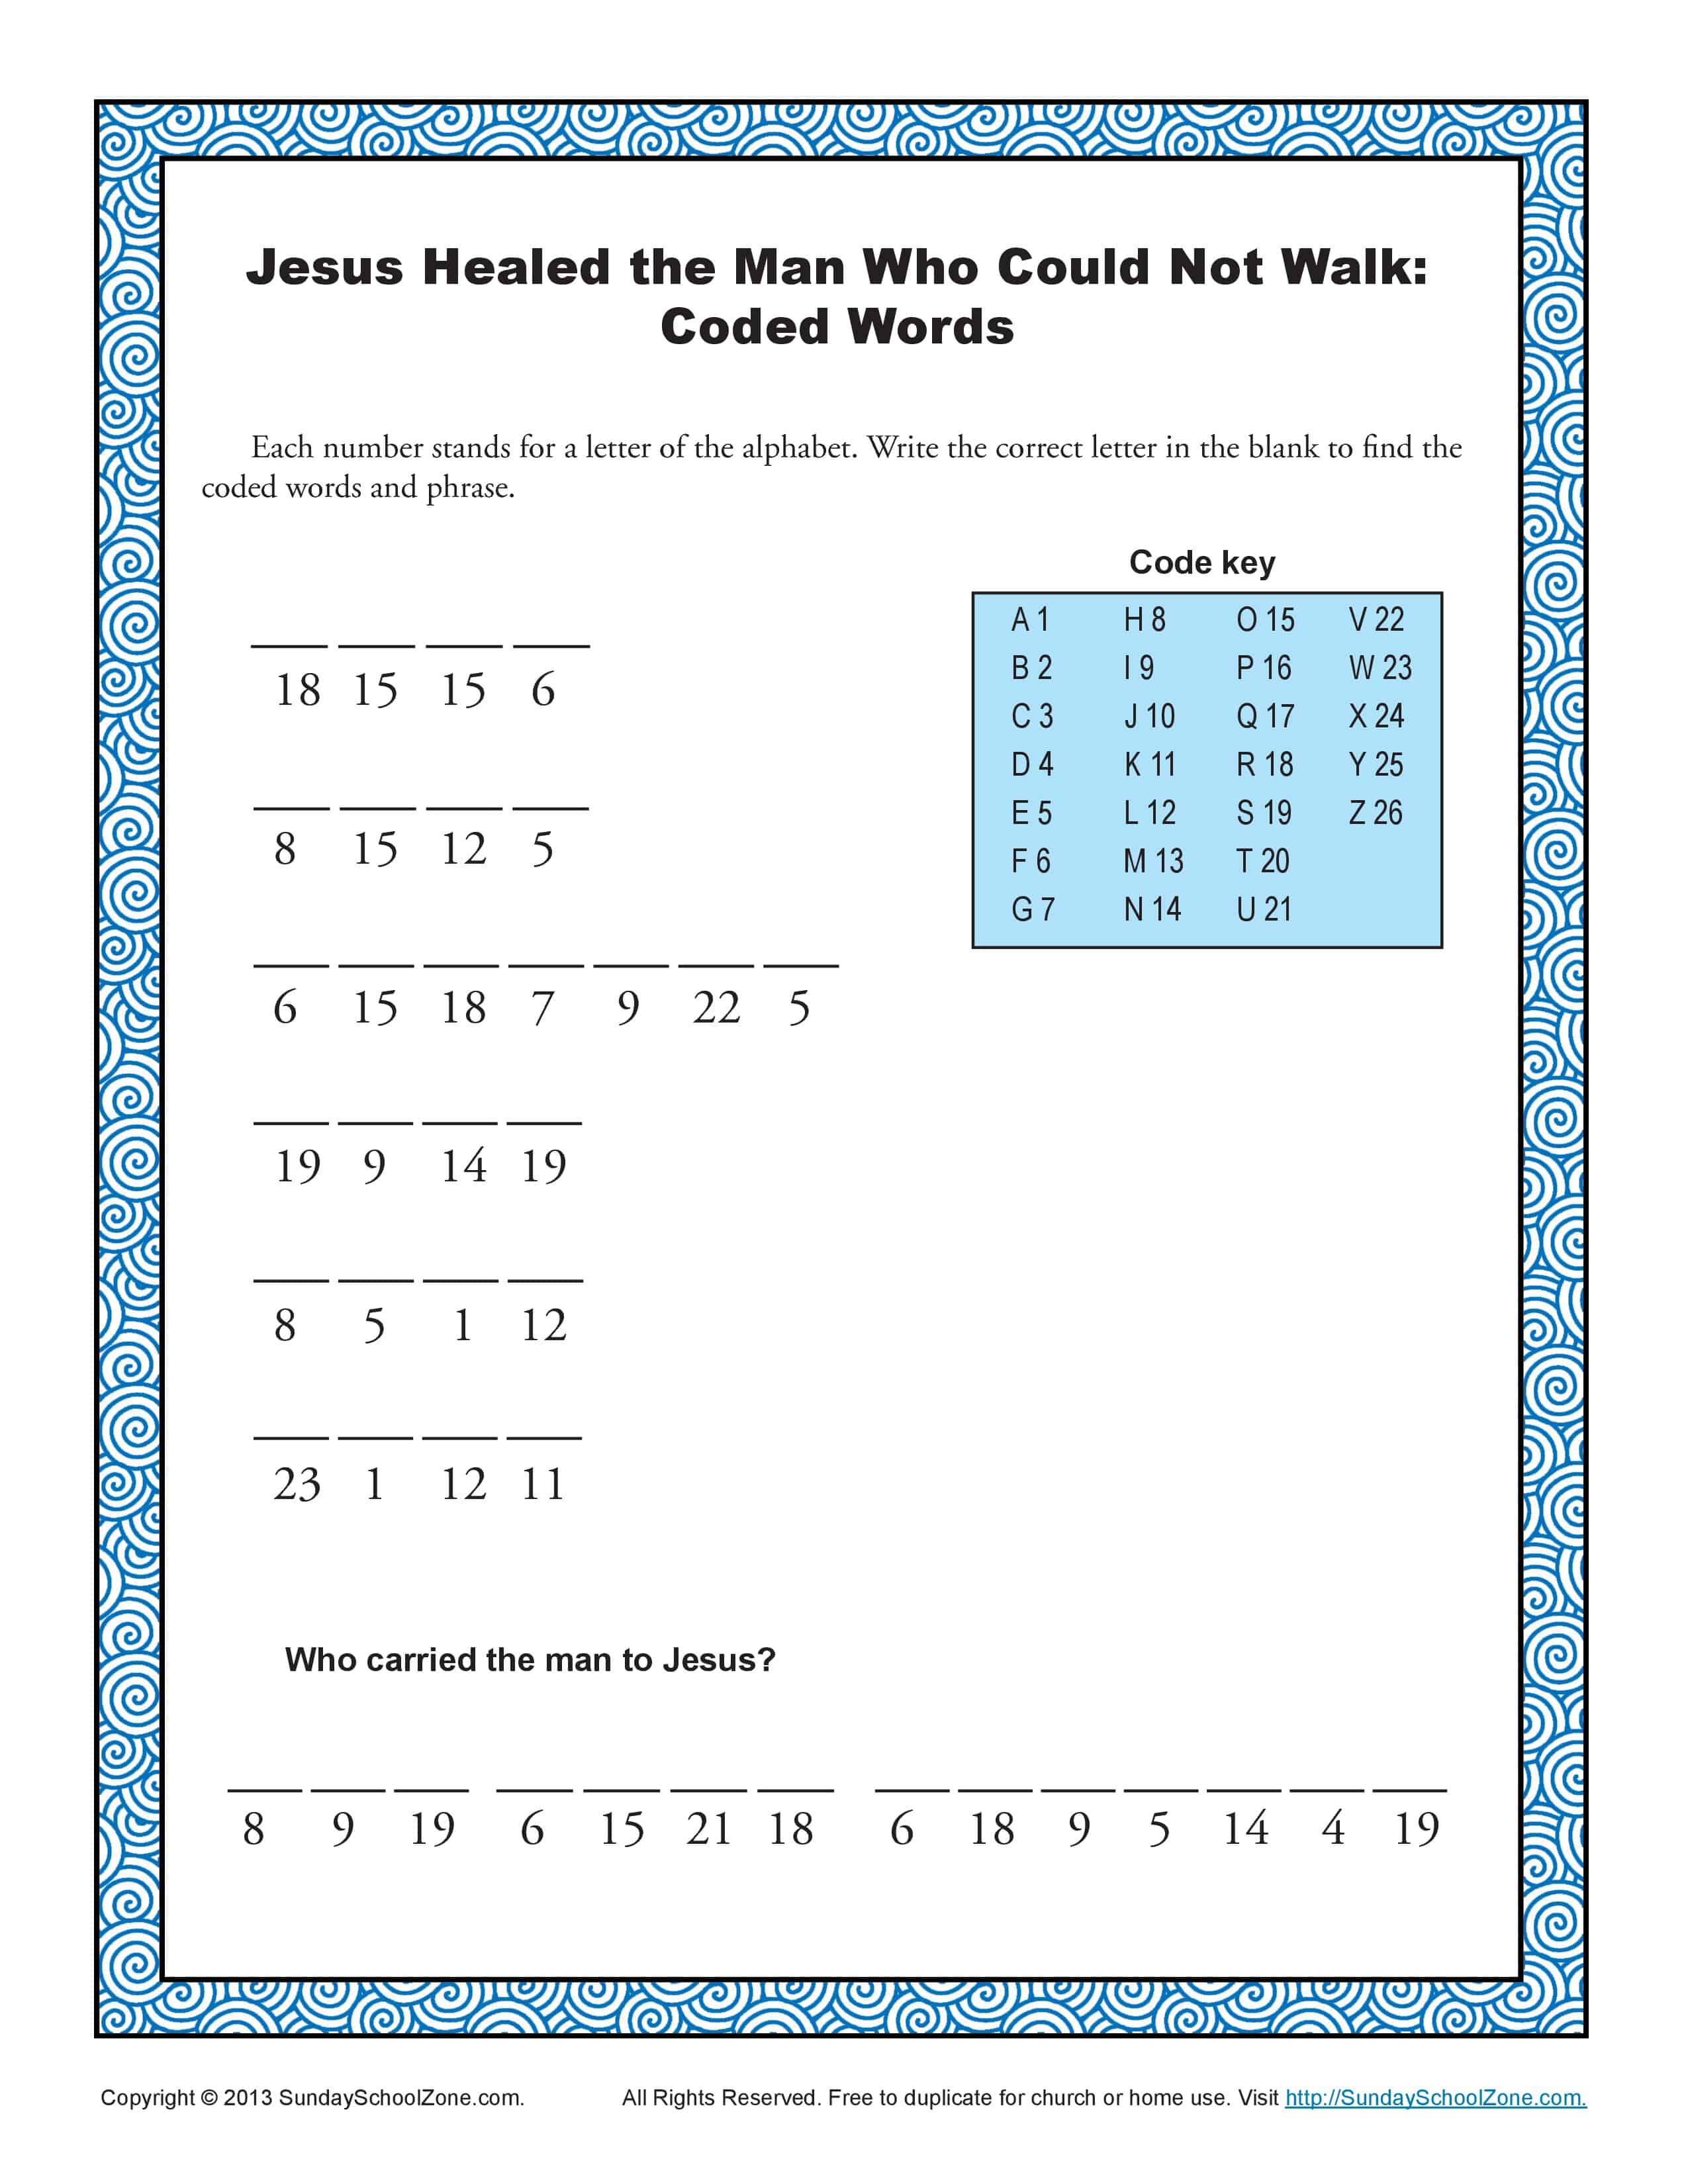 Jesus Healed the Paralytic Code Words Puzzle Bible Activities for